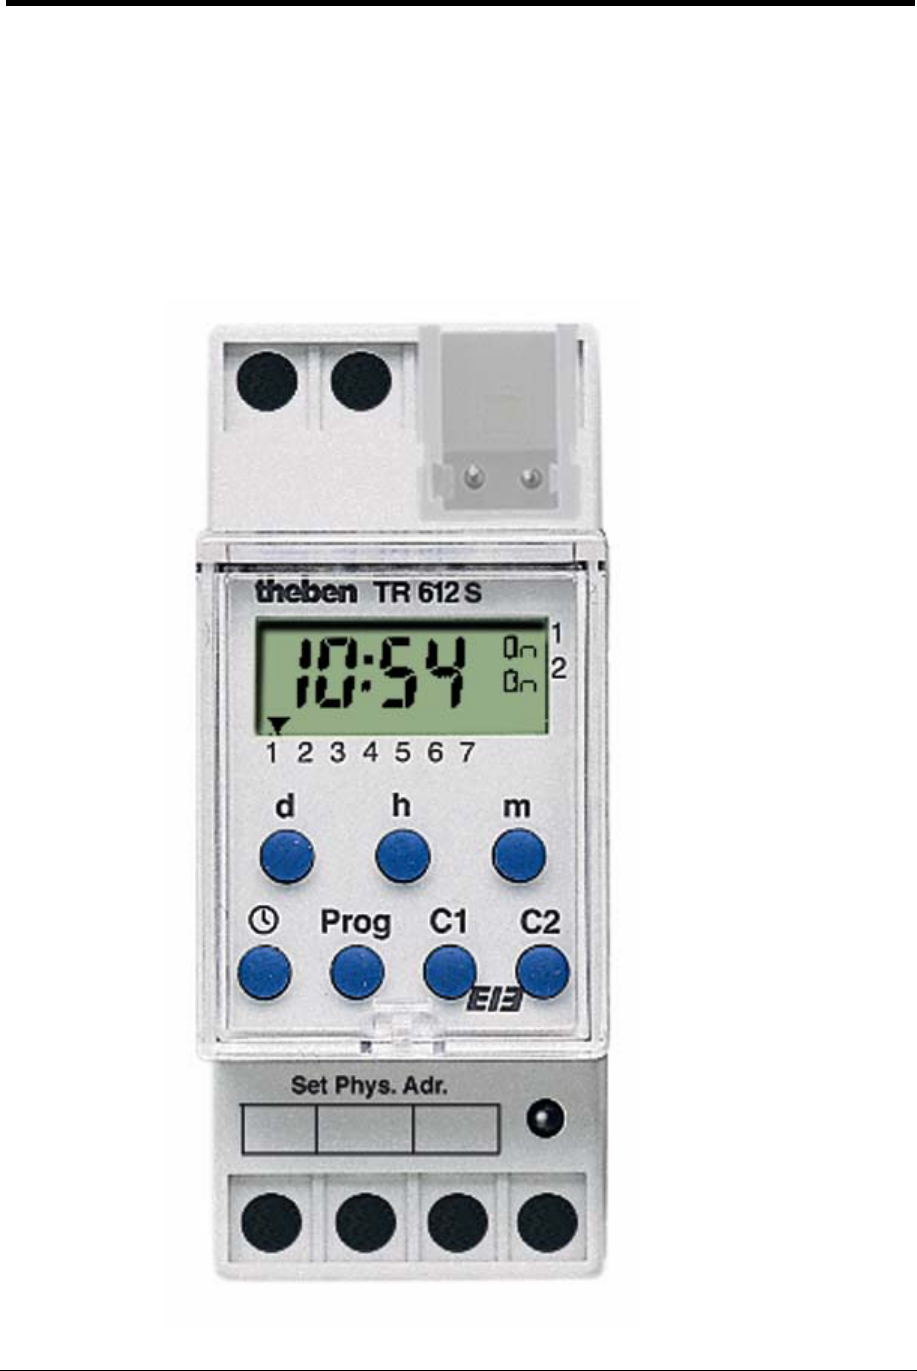 Theben TR612S Digital Time Switch Relay 